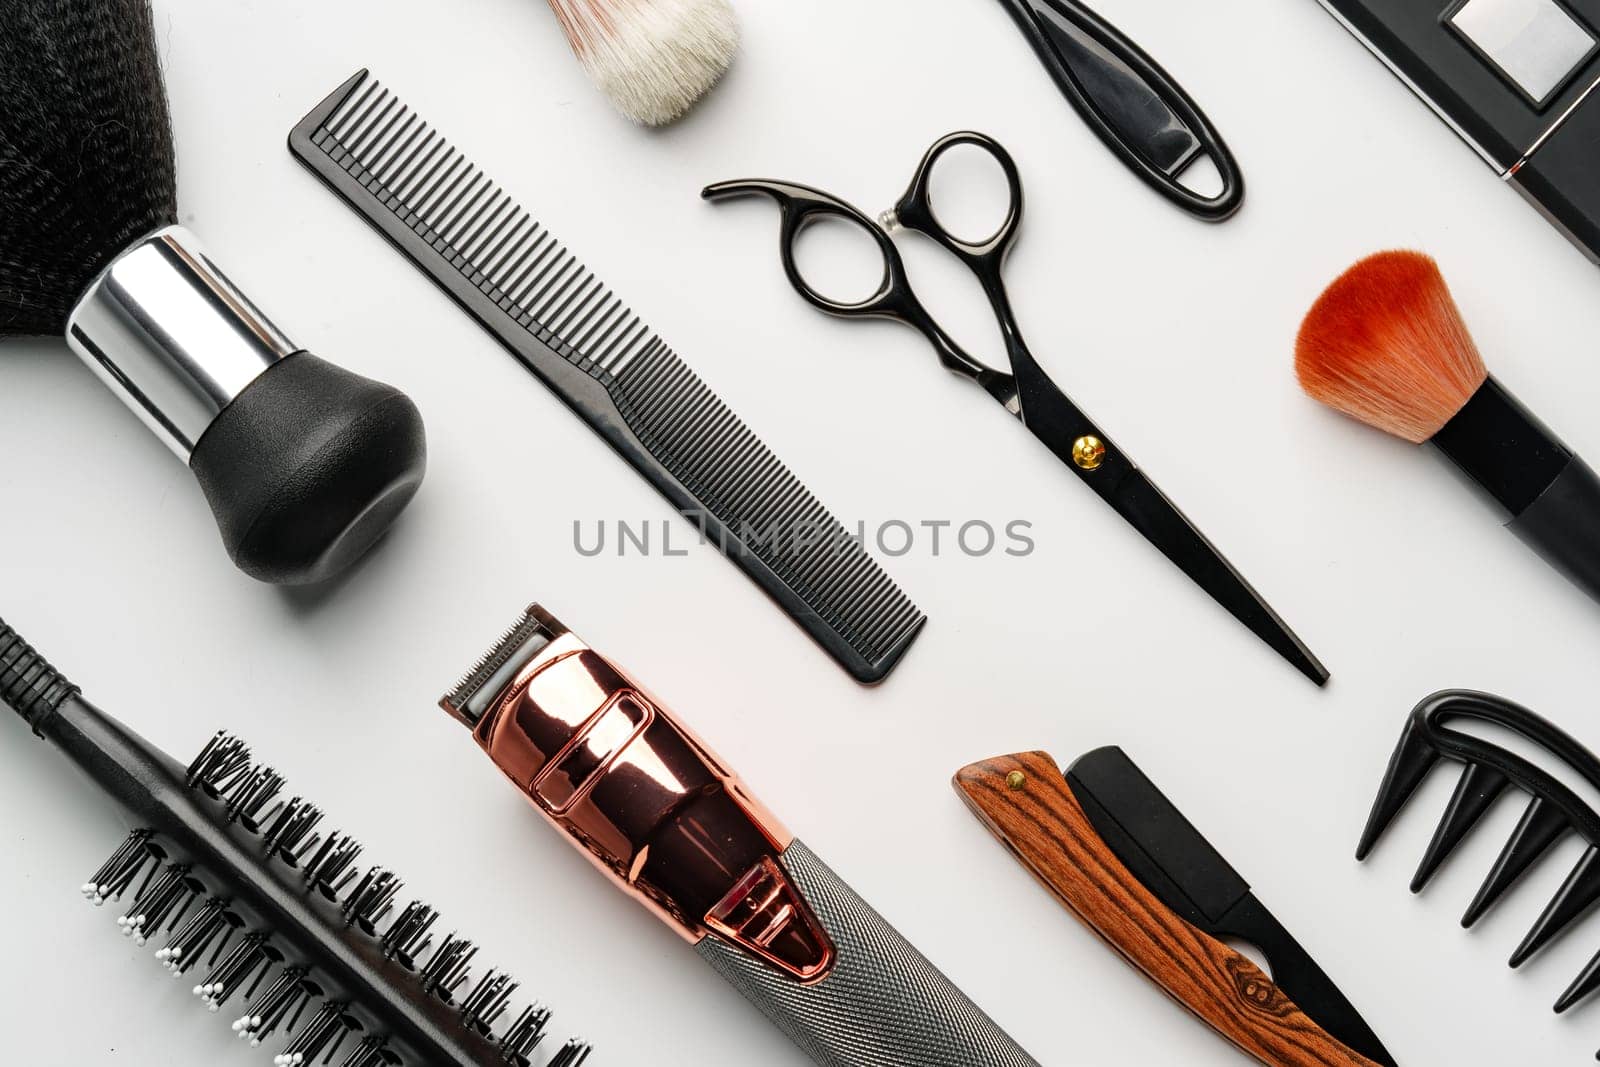 Pattern of various shaving and bauty care accessories for men on gray background by Fabrikasimf